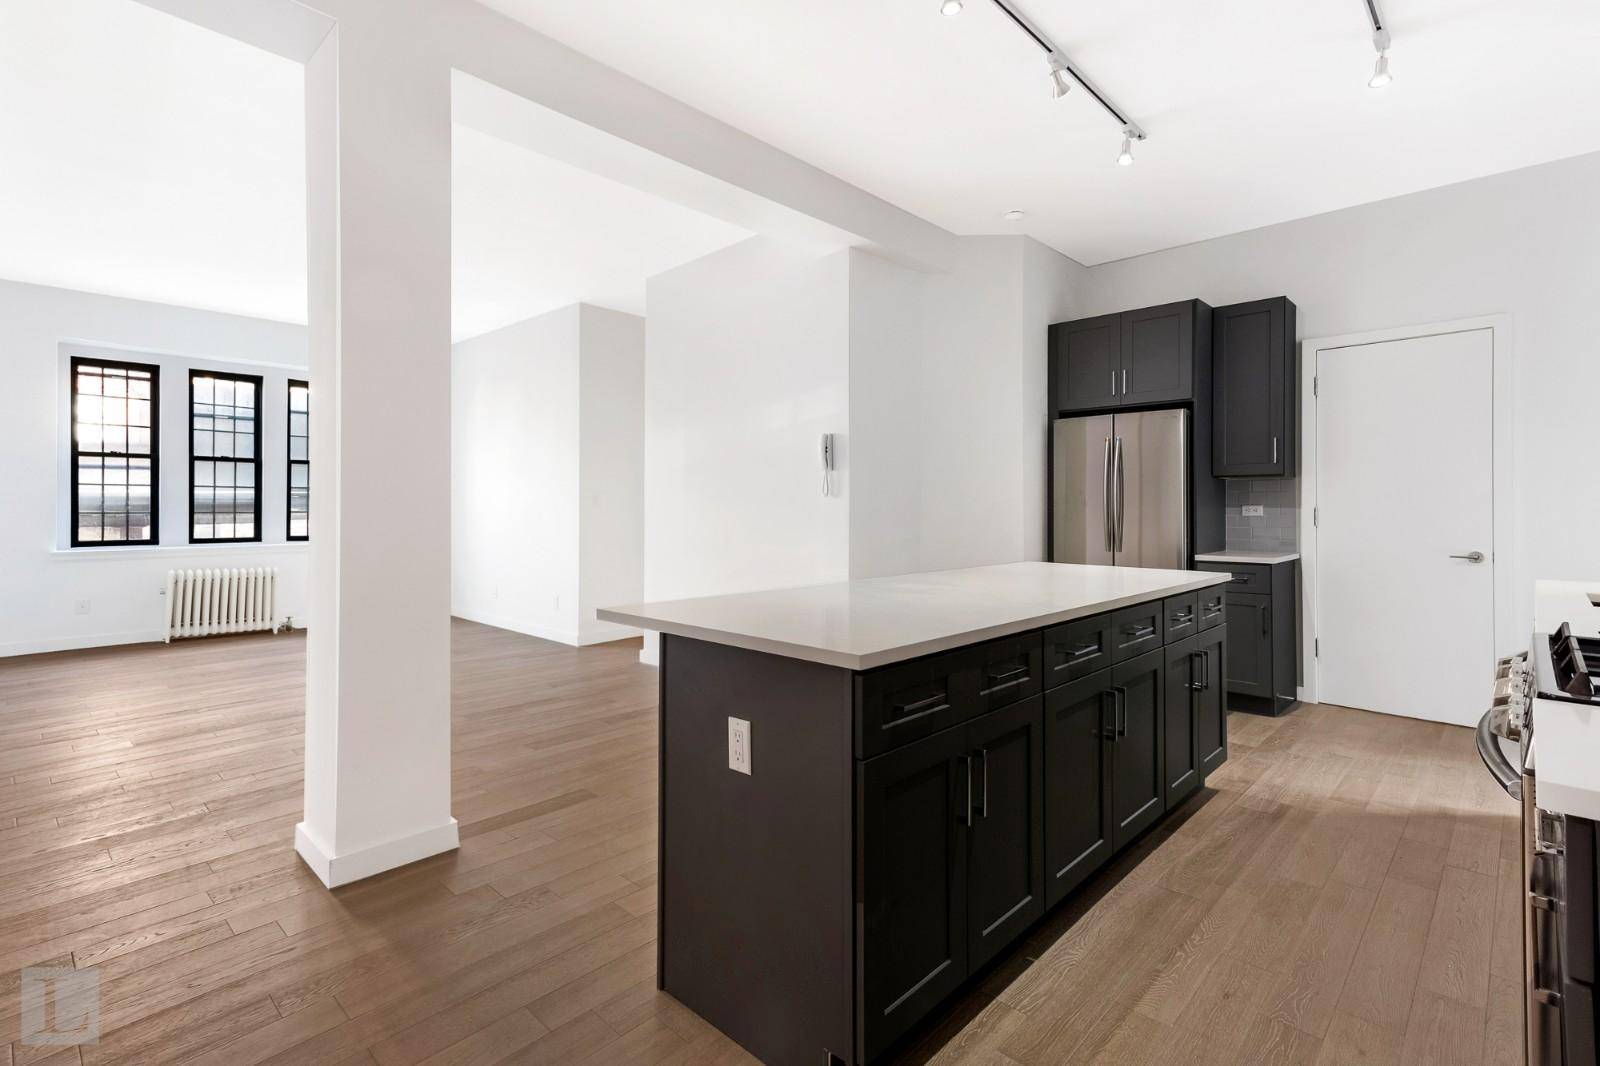 Completely Renovated 3 Bdr Prime Park Slope Virtual Tour Available at end of photos APARTMENT FEATURES No Broker Fee !